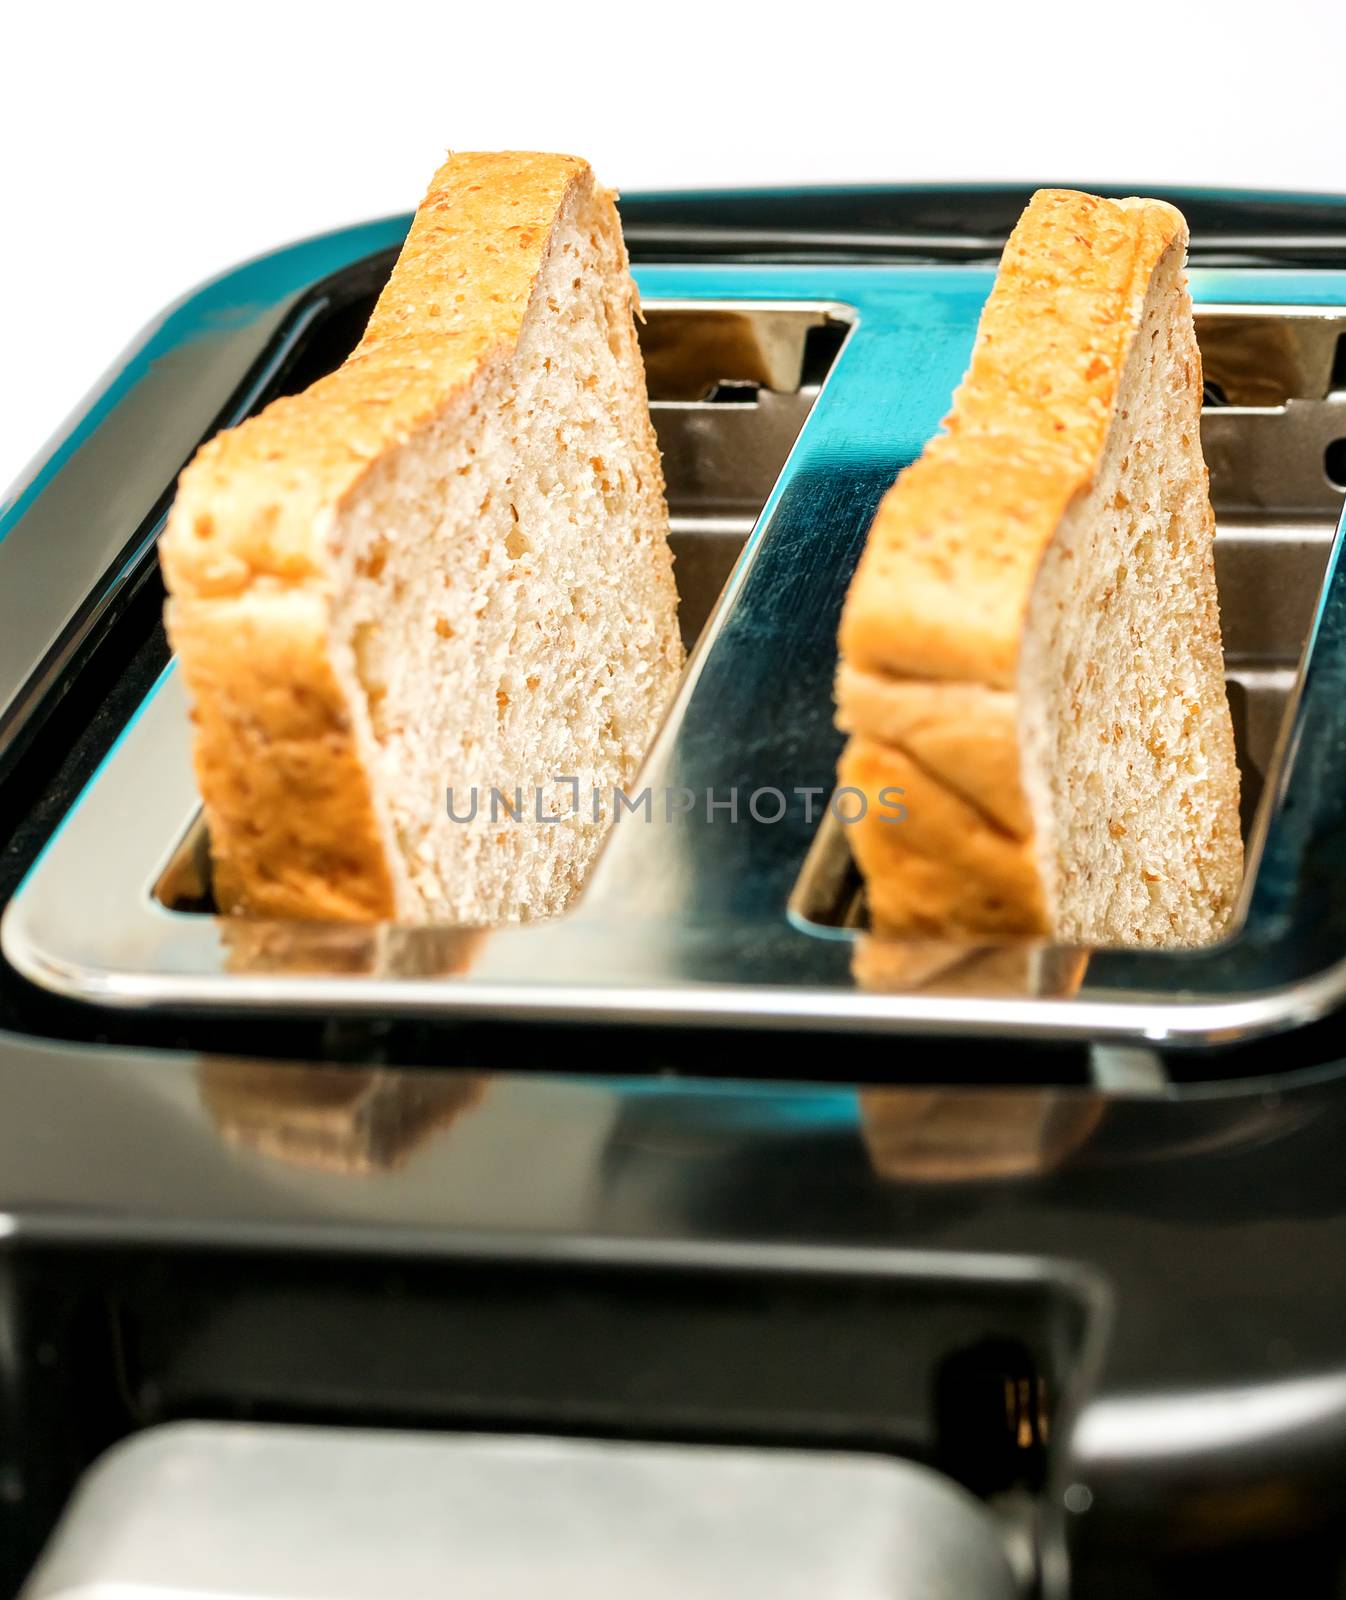 Bread Toaster Representing Meal Time And Food